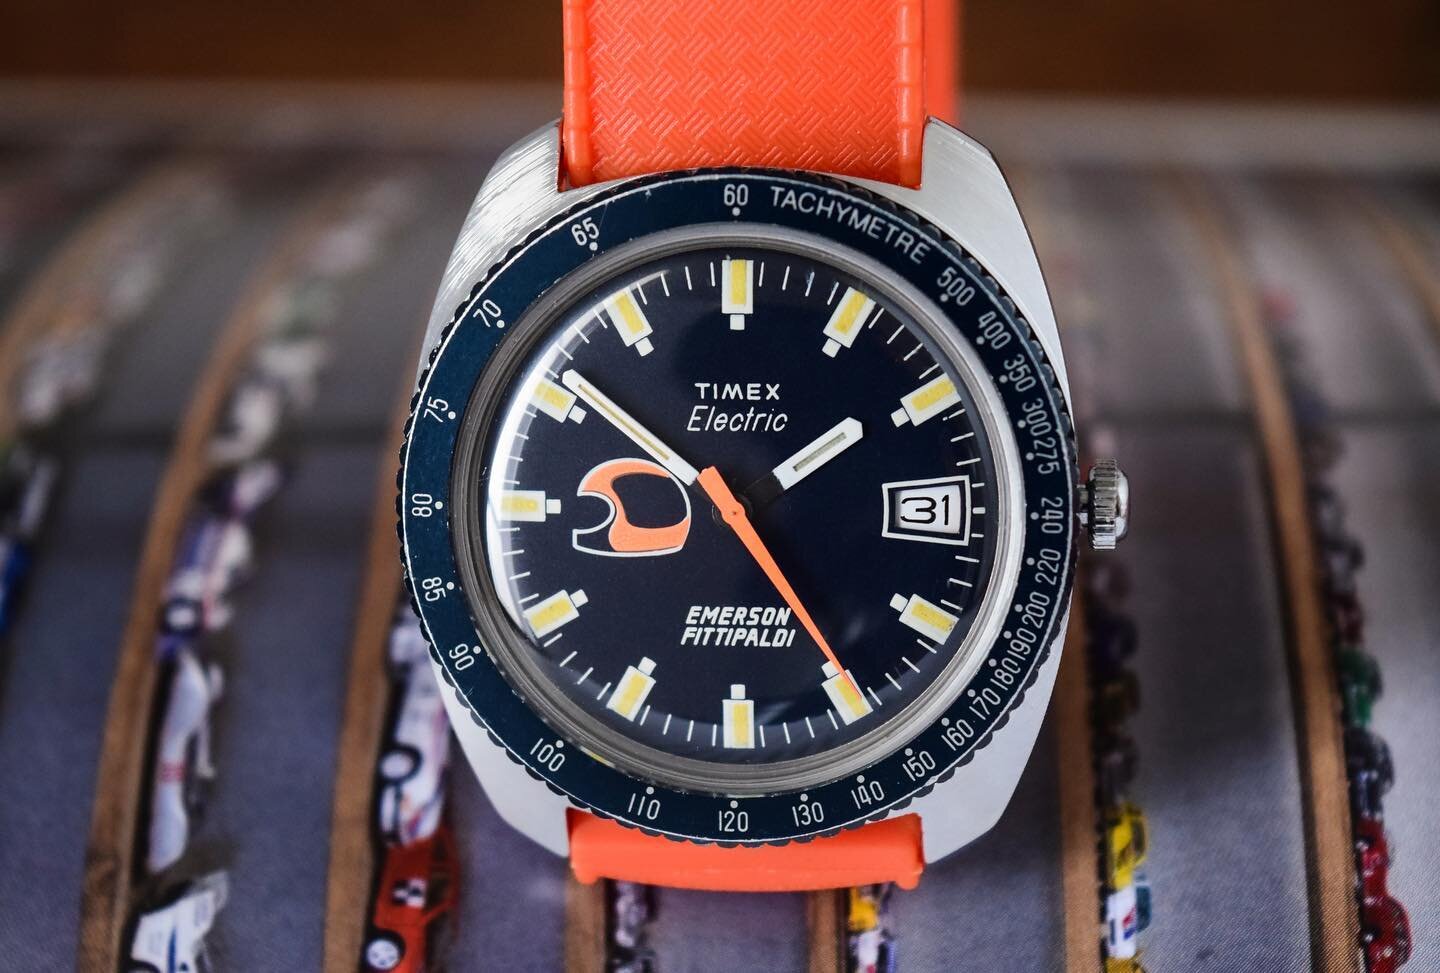 In honor of the beginning of the Formula 1 Racing season, I bring to your some Emerson Fittipaldi  x Timex 70s treats.

Enjoy!
__________________________
#timex #racing #vintagetimex #heritagetimex #heritage1854 #whatsonmywrist #wristcandy #horology 